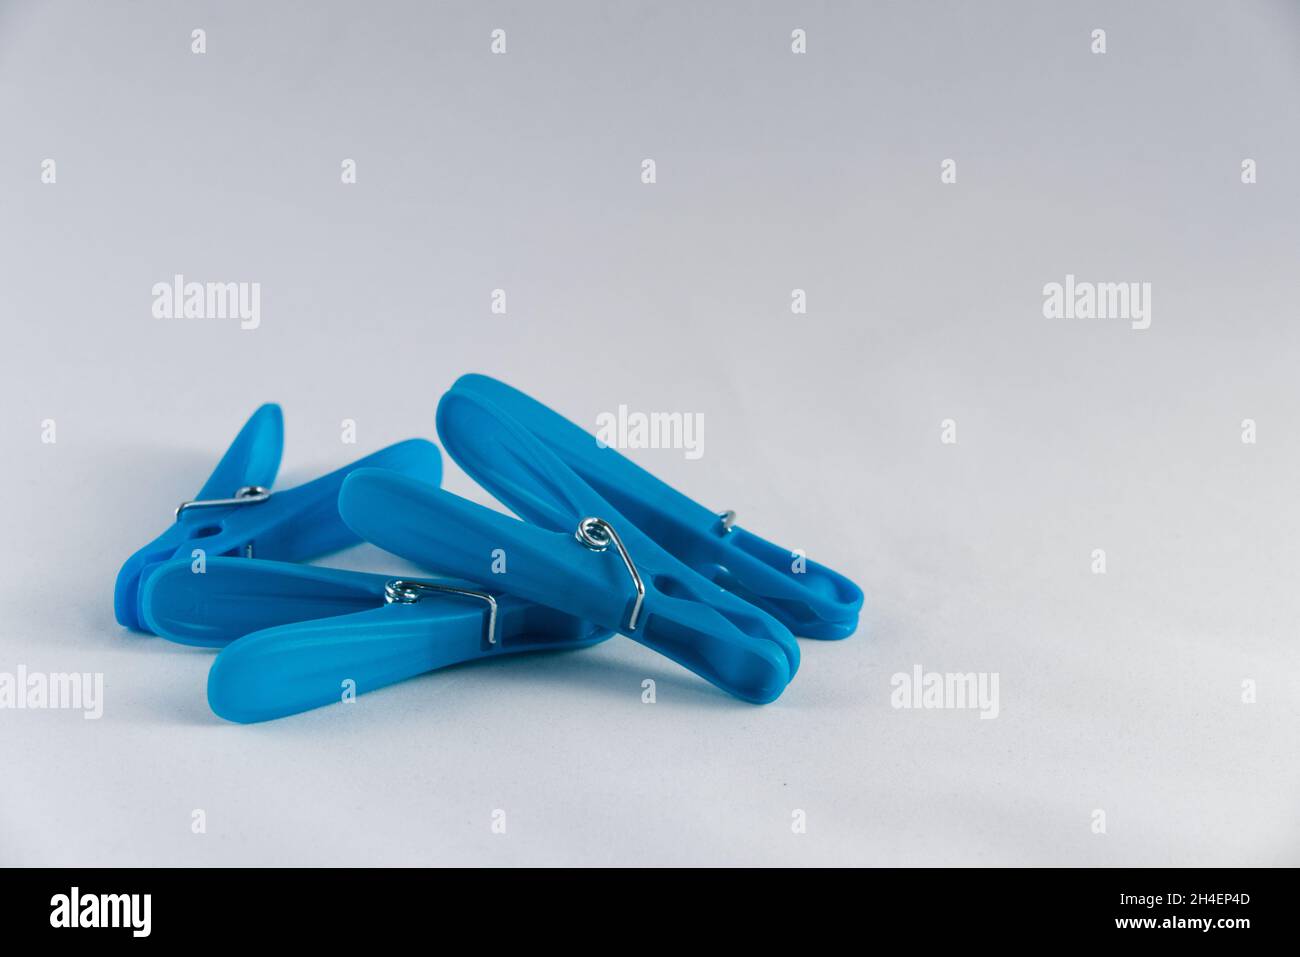 A heap of blue plastic clothes pegs (clothes pins), stacked randomly against a white background. Copy space to the top right. Stock Photo